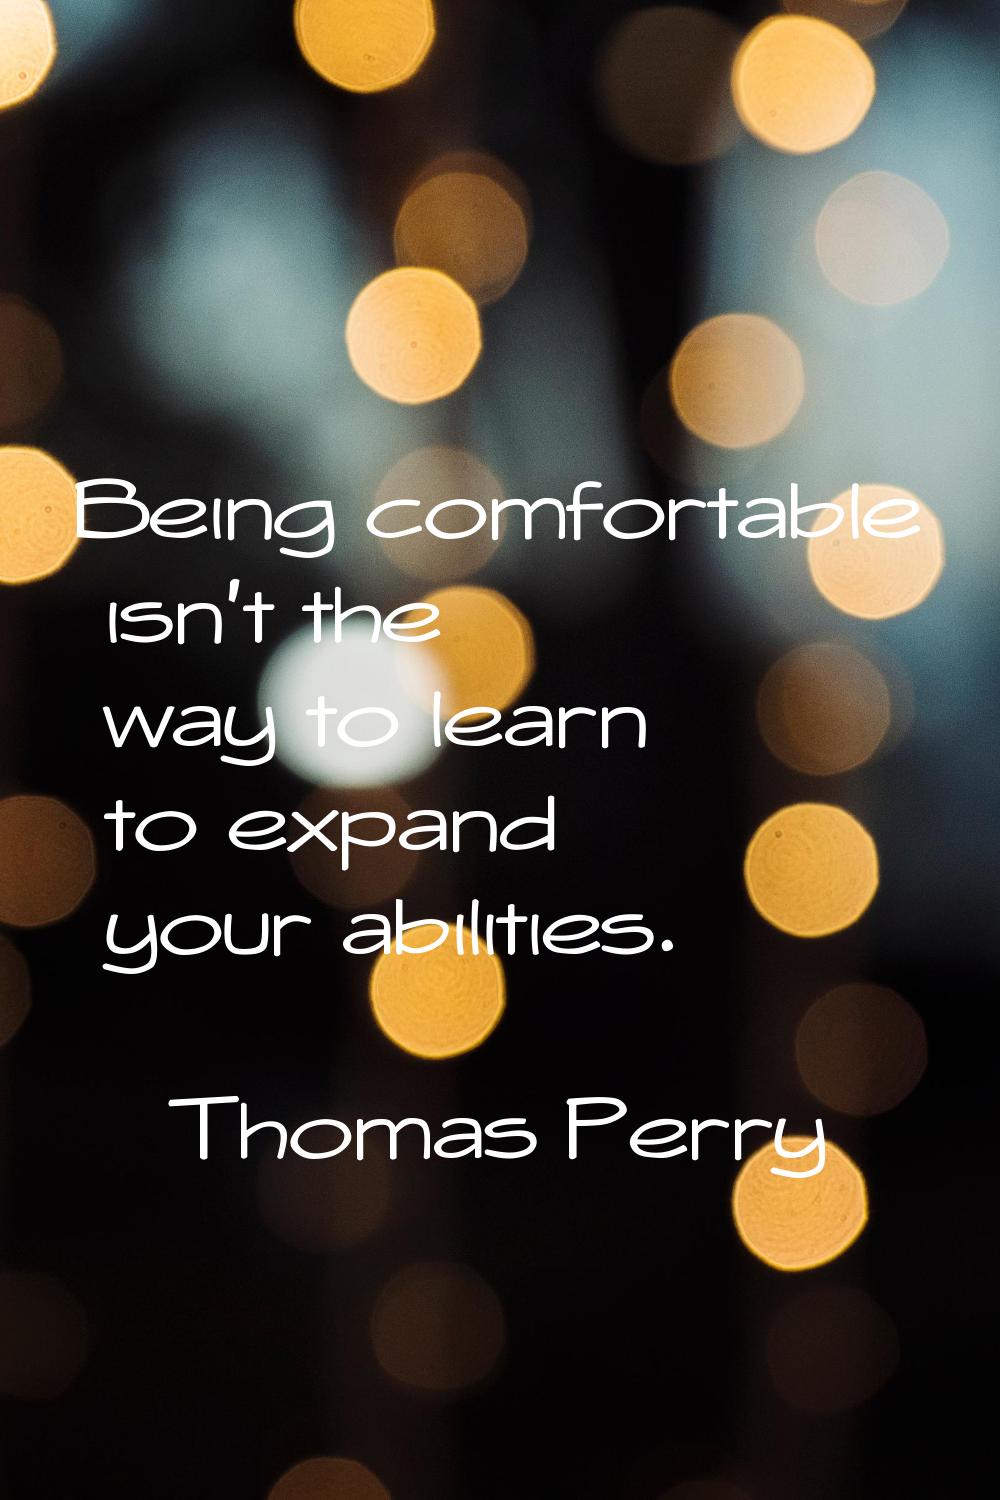 Being comfortable isn't the way to learn to expand your abilities.